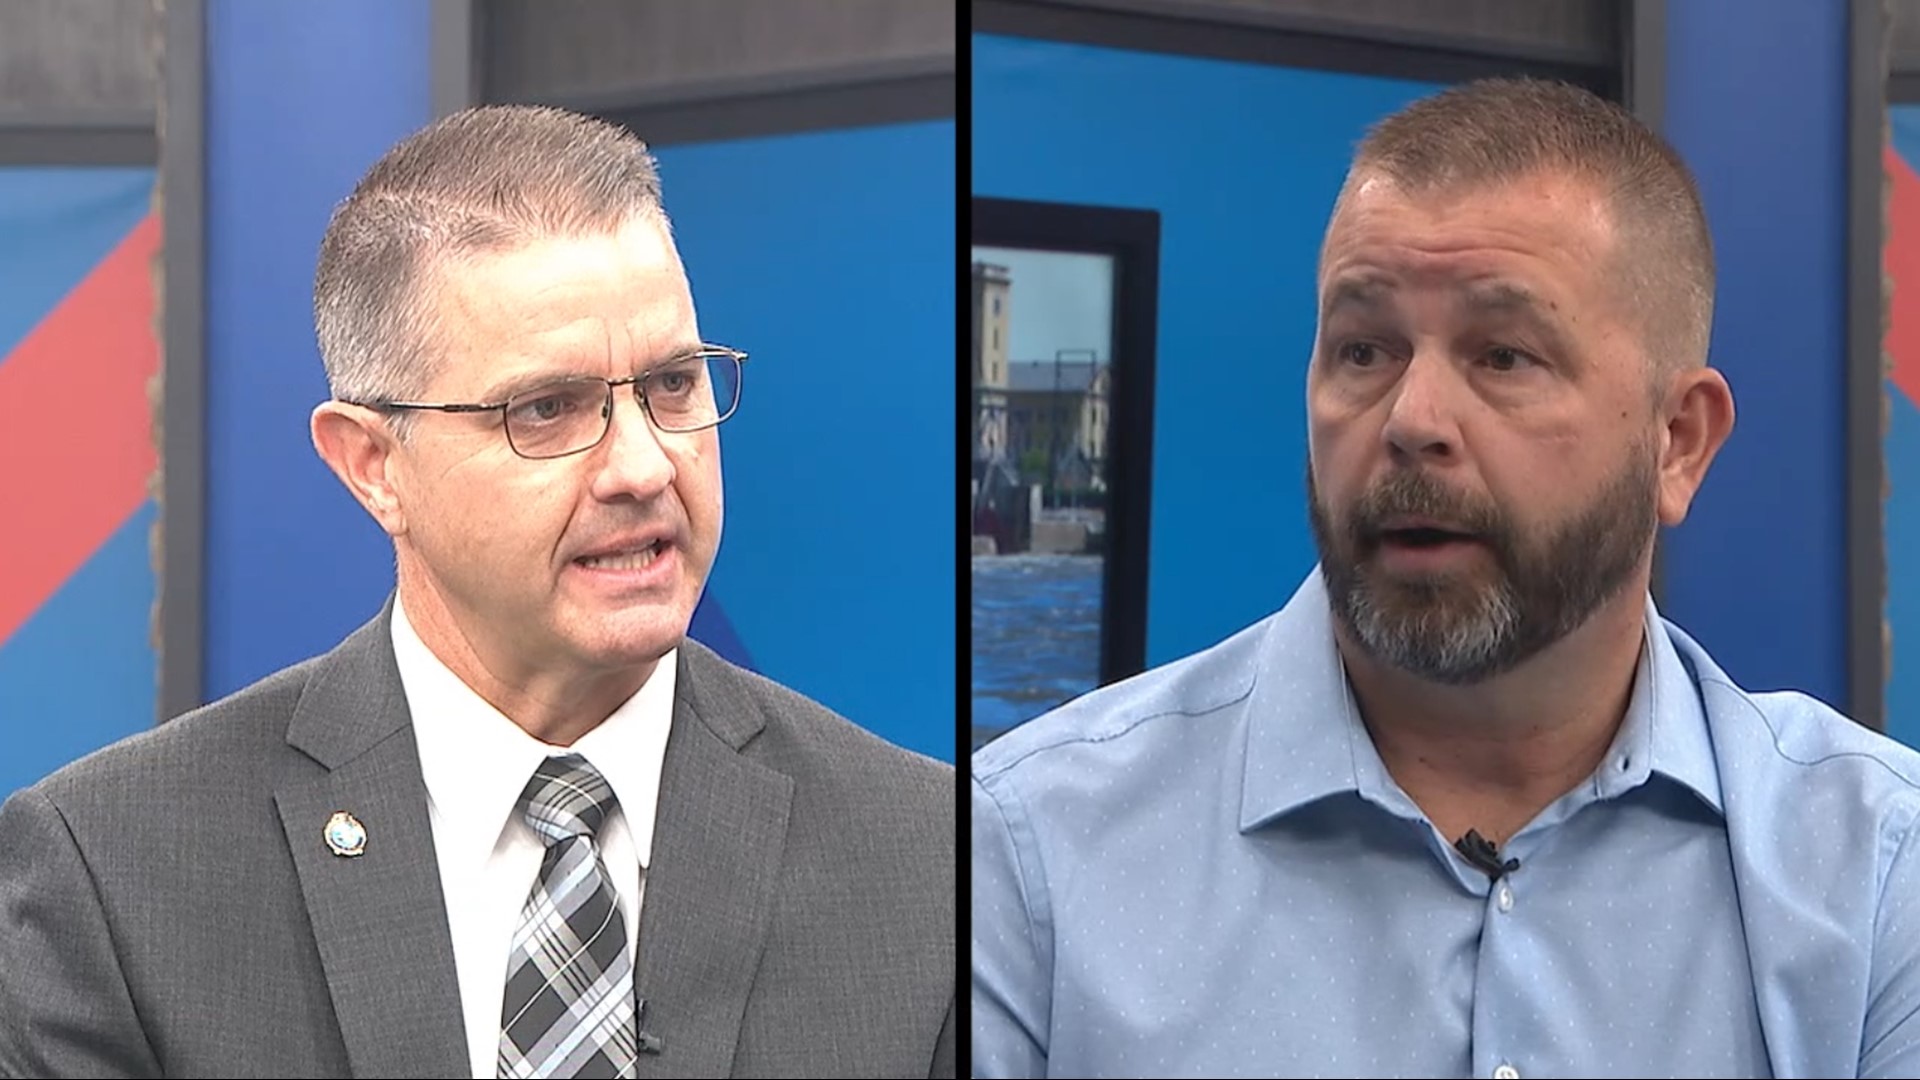 In a few weeks, either Darren Hart (D) or Patrick Moody (R) will replace Gerry Bustos as Rock Island County Sheriff.